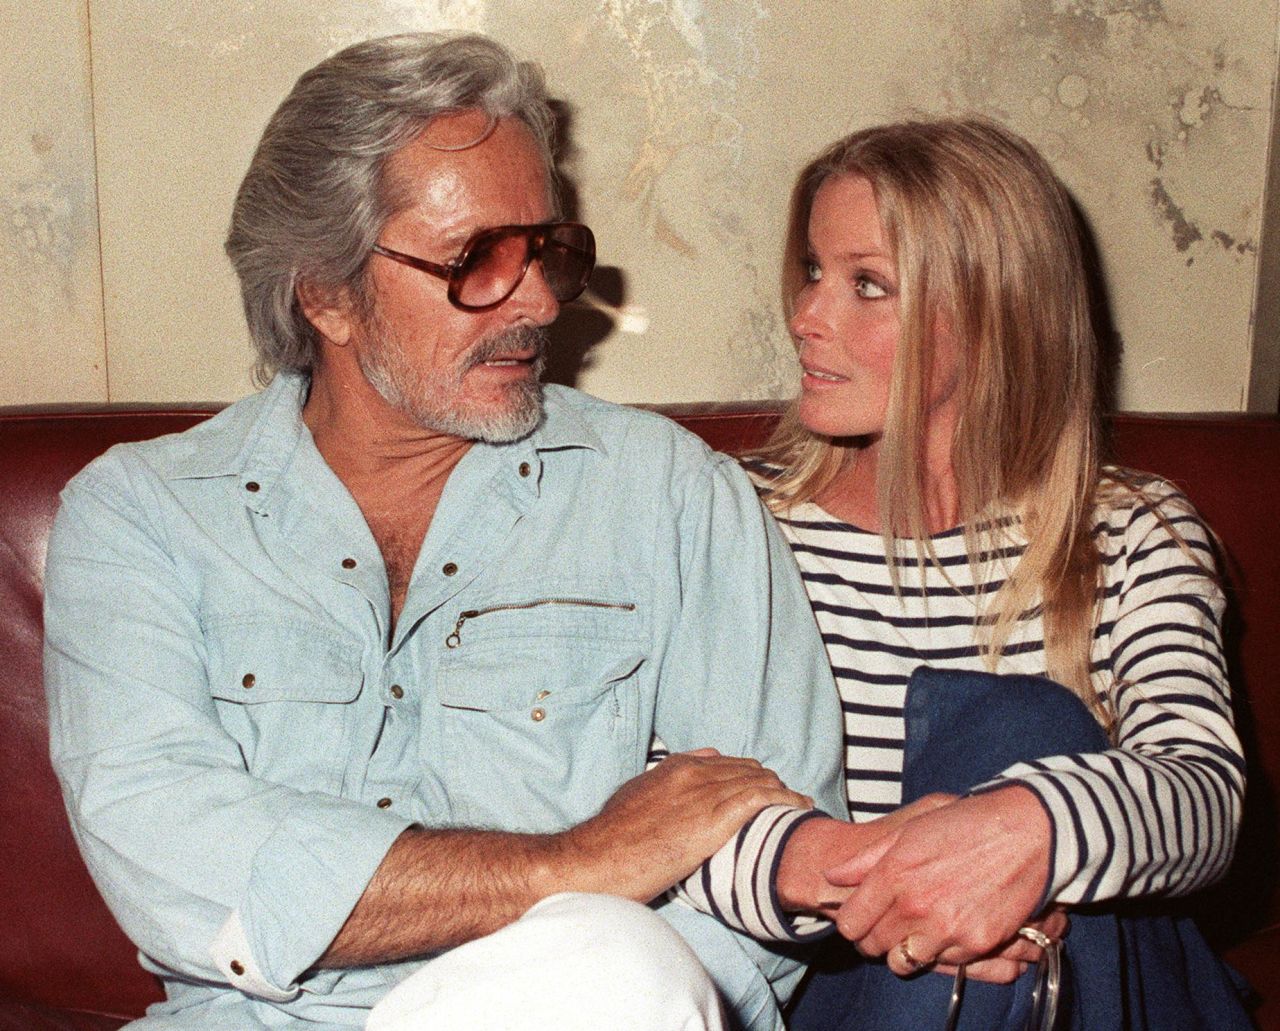 Bo Derek met John Derek, who was 30 years her senior, when she was just 16 and married him two years later. Despite the age difference, this pairing is one of few young celebrity engagement success stories. The couple remained together until John's death in 1998. 